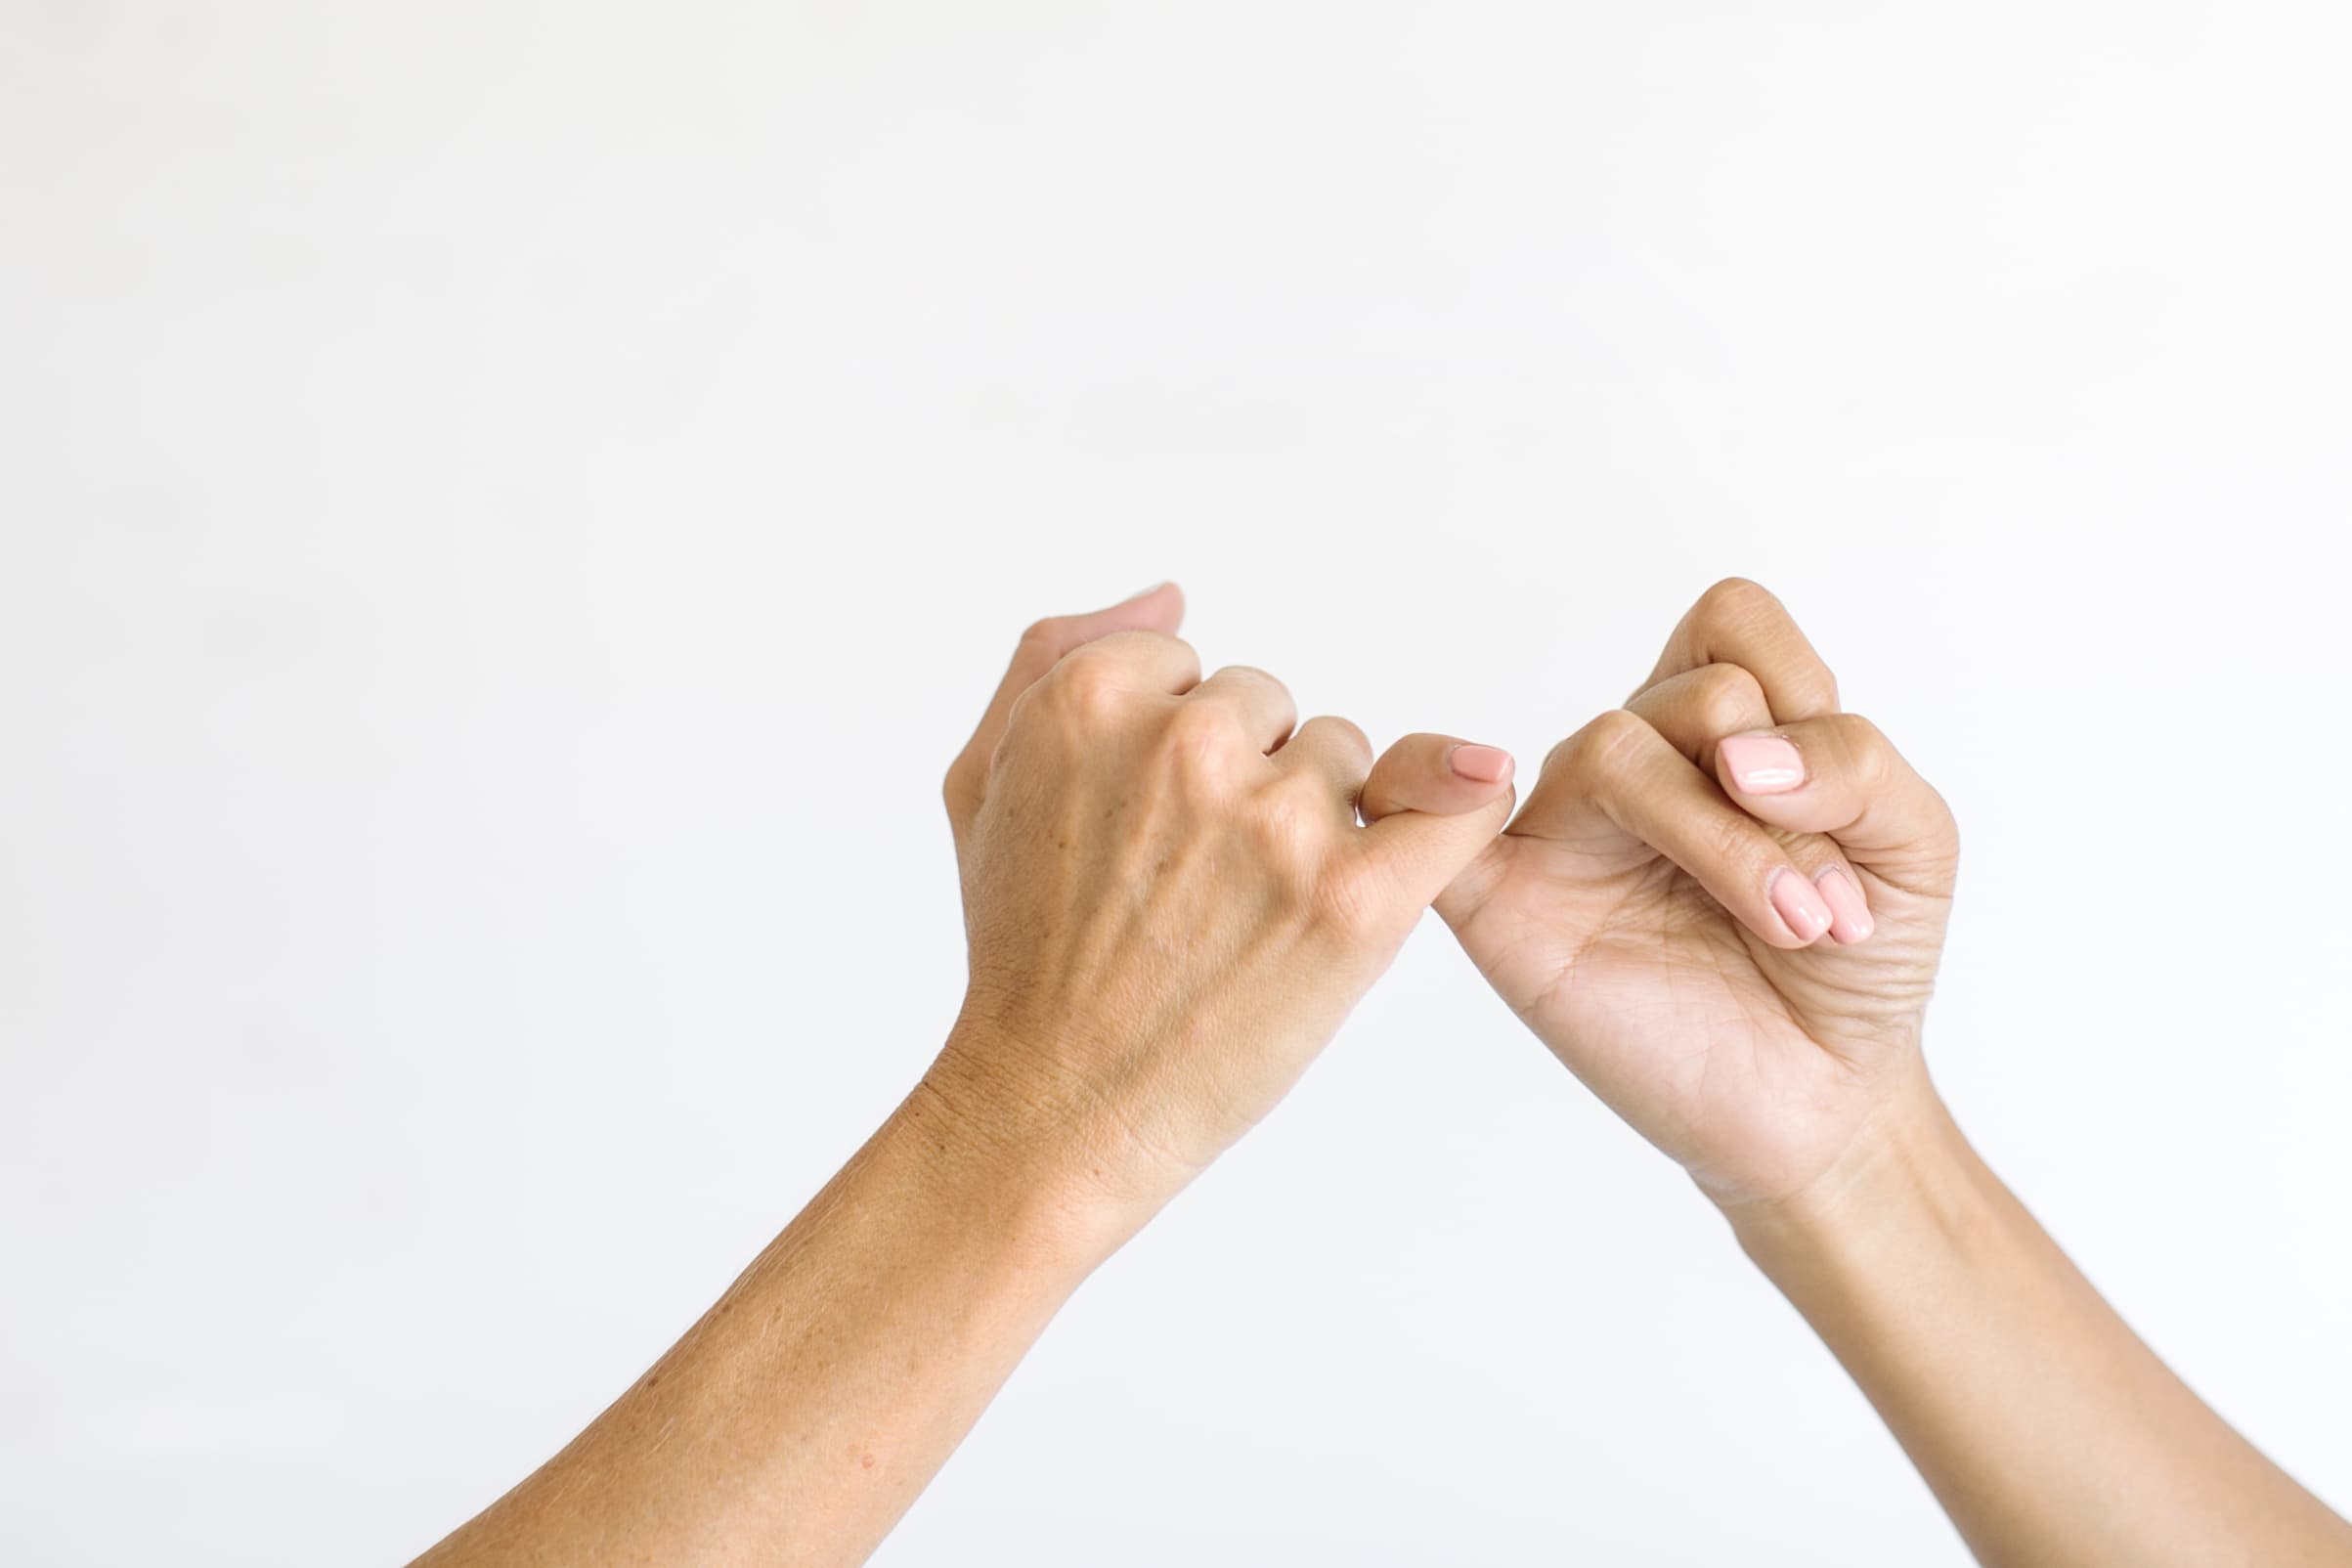 Two hands, embodying the strength found in community, making a pinky promise against a plain background.